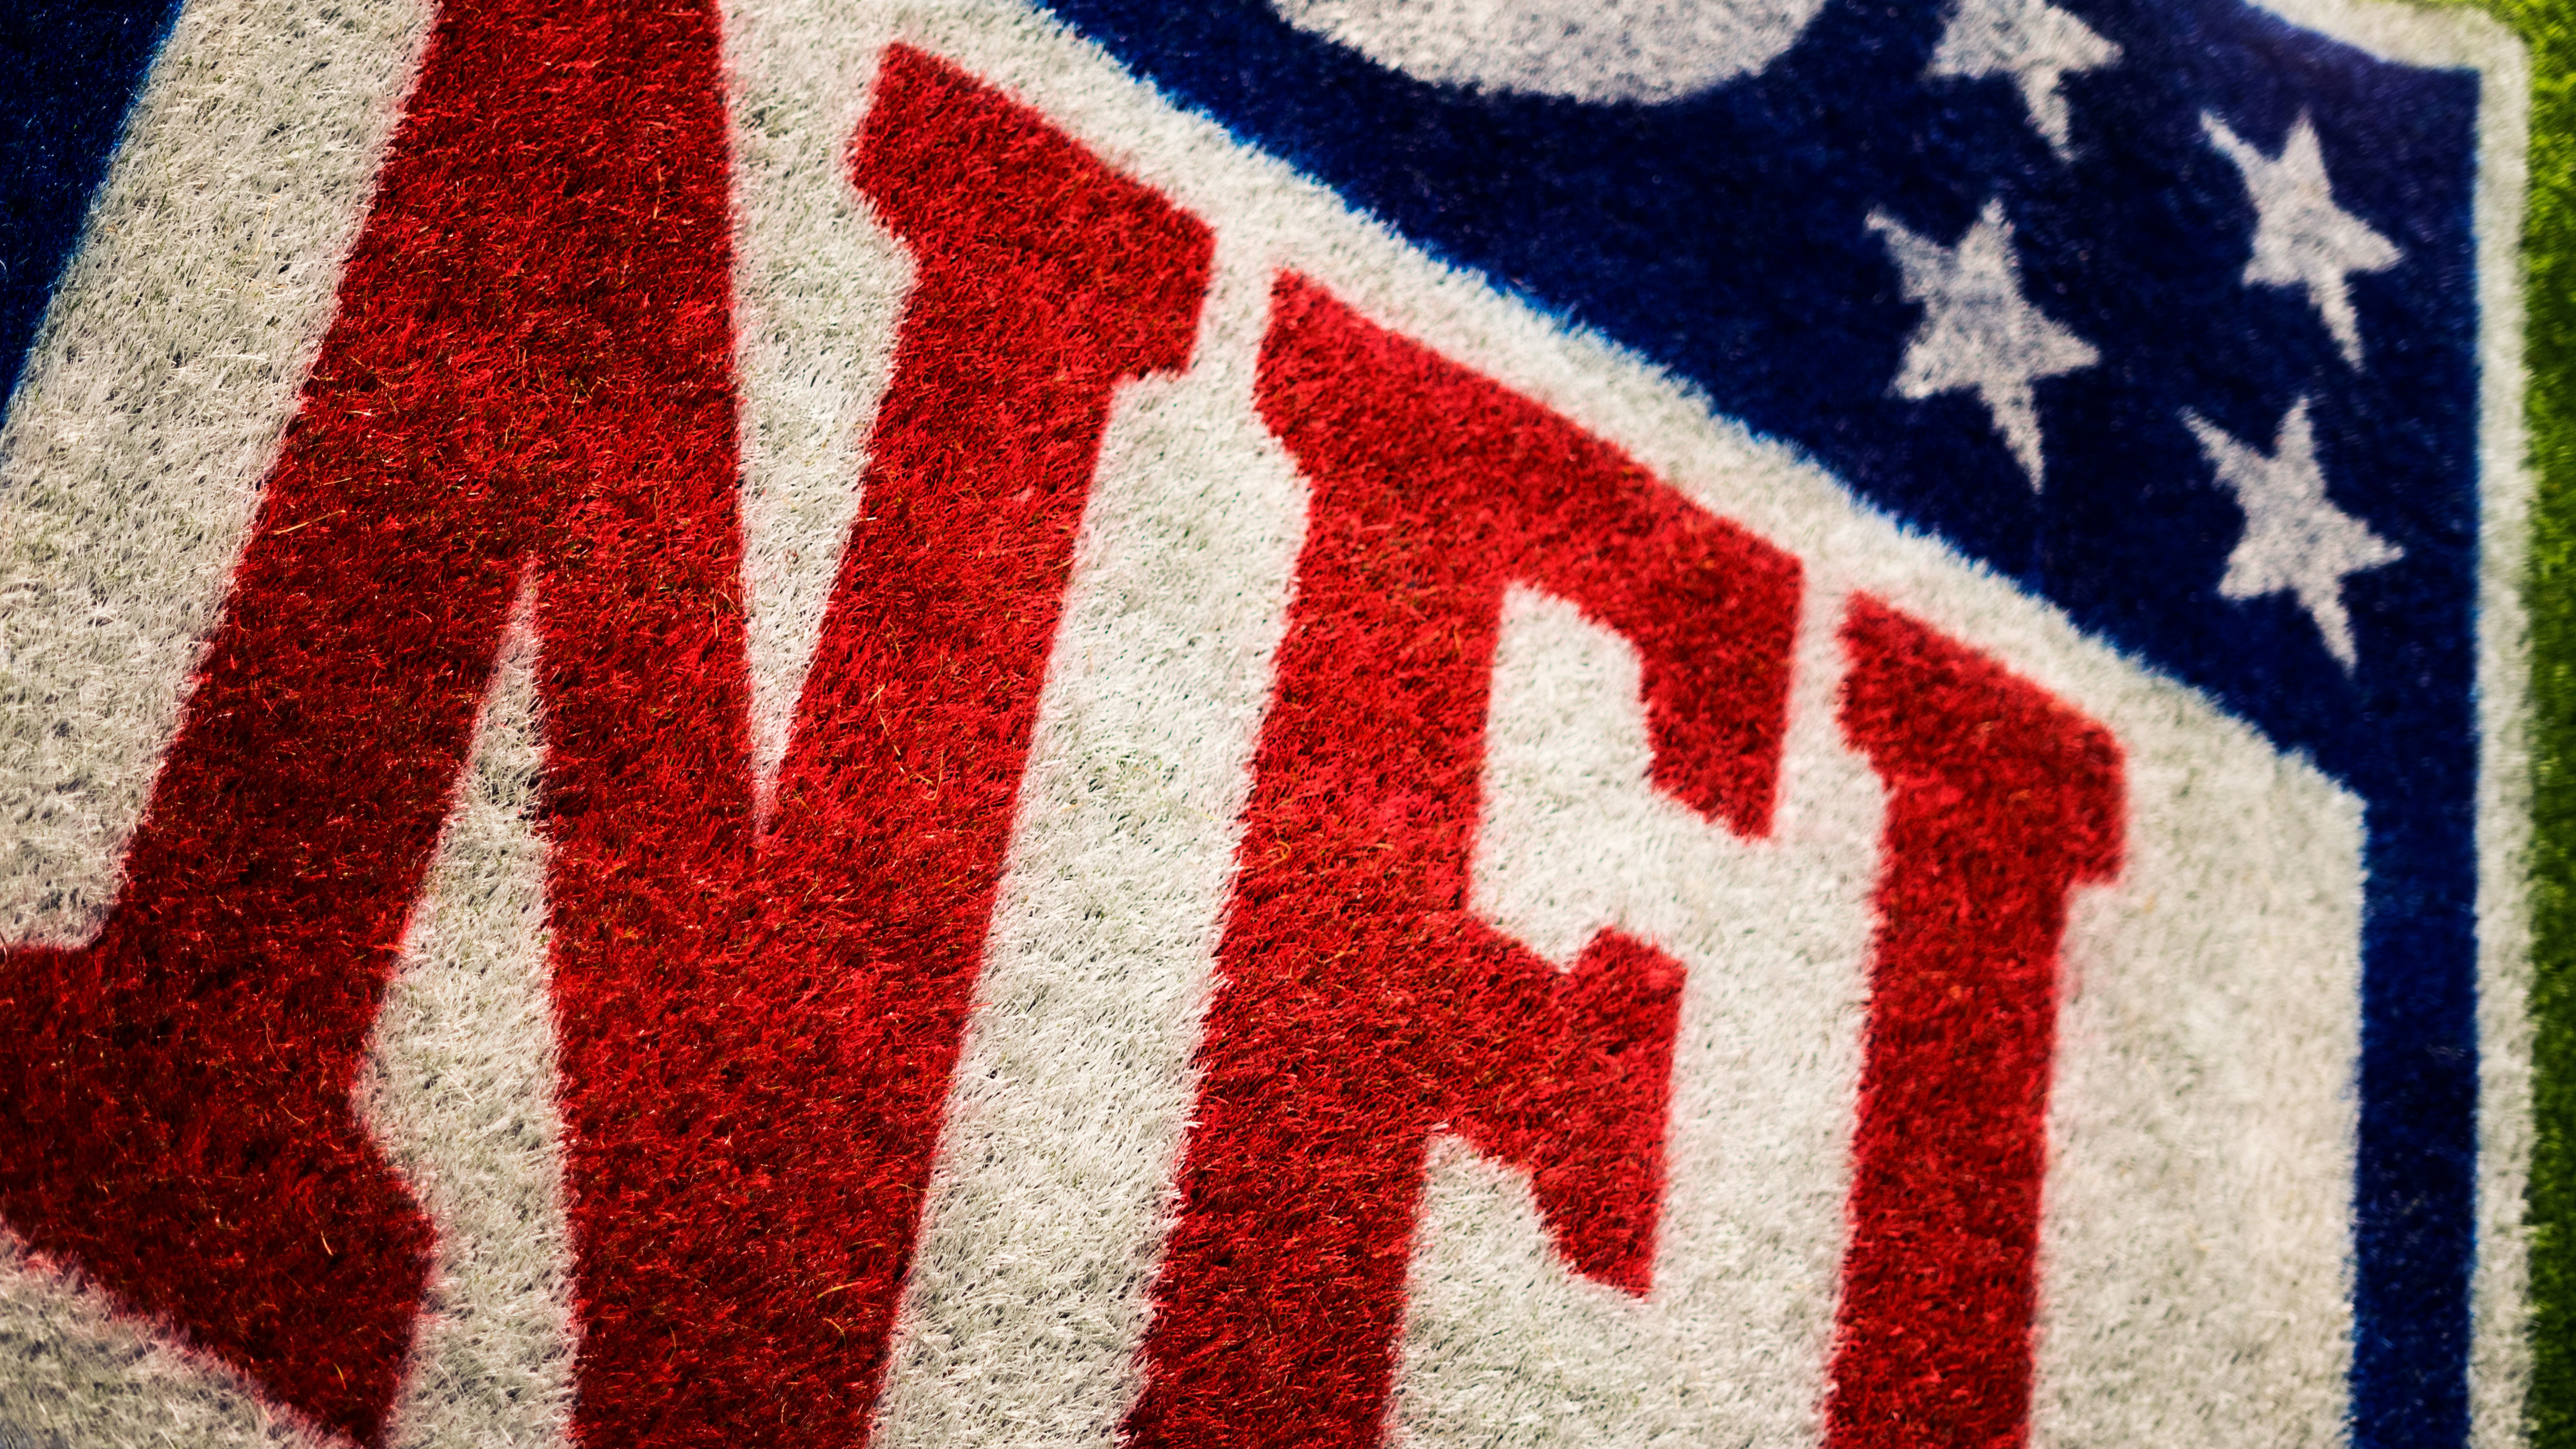 Which NFL Teams are Scoring with Diverse Audiences?